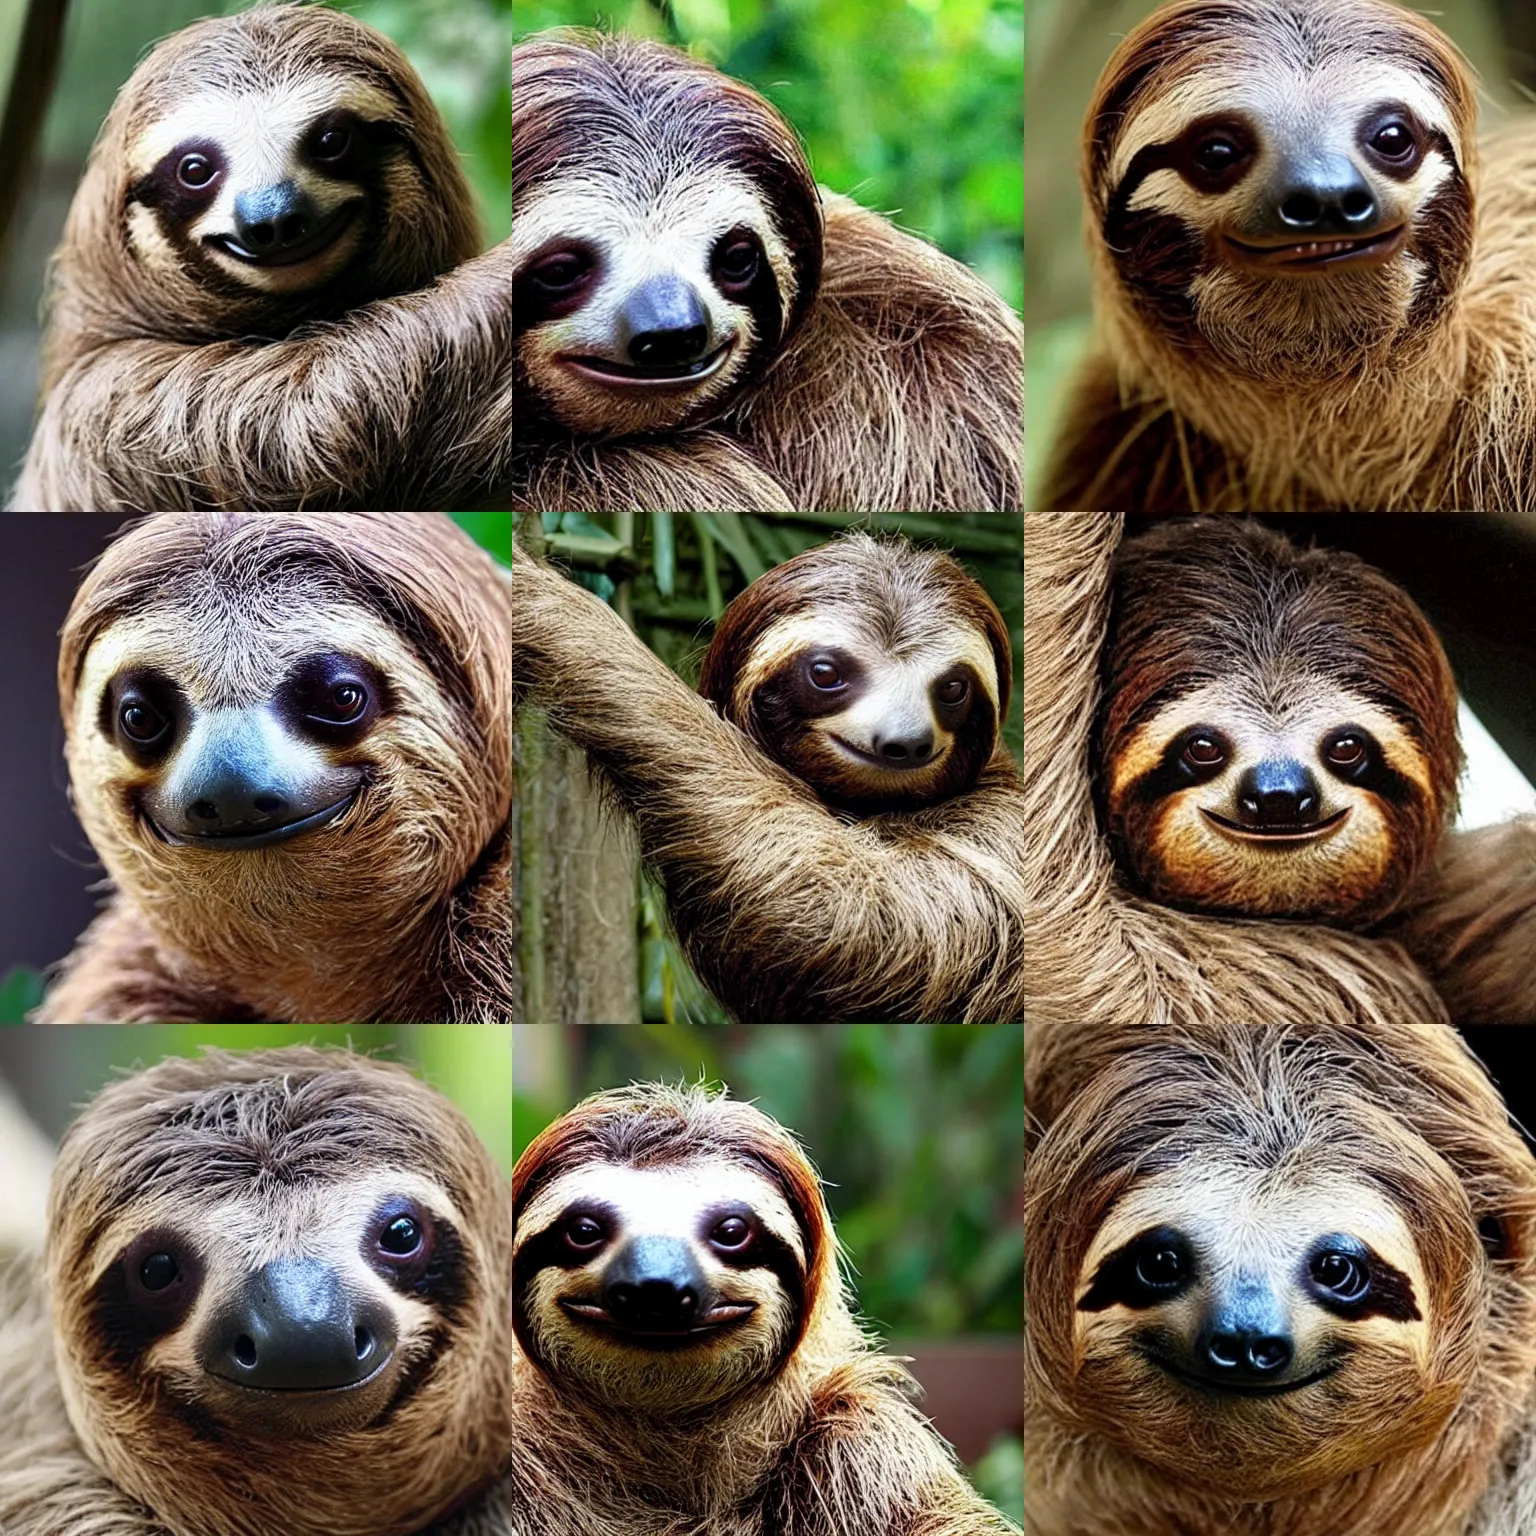 Prompt: a sloth with a face that looks like brad pitt, man - animal hybrid